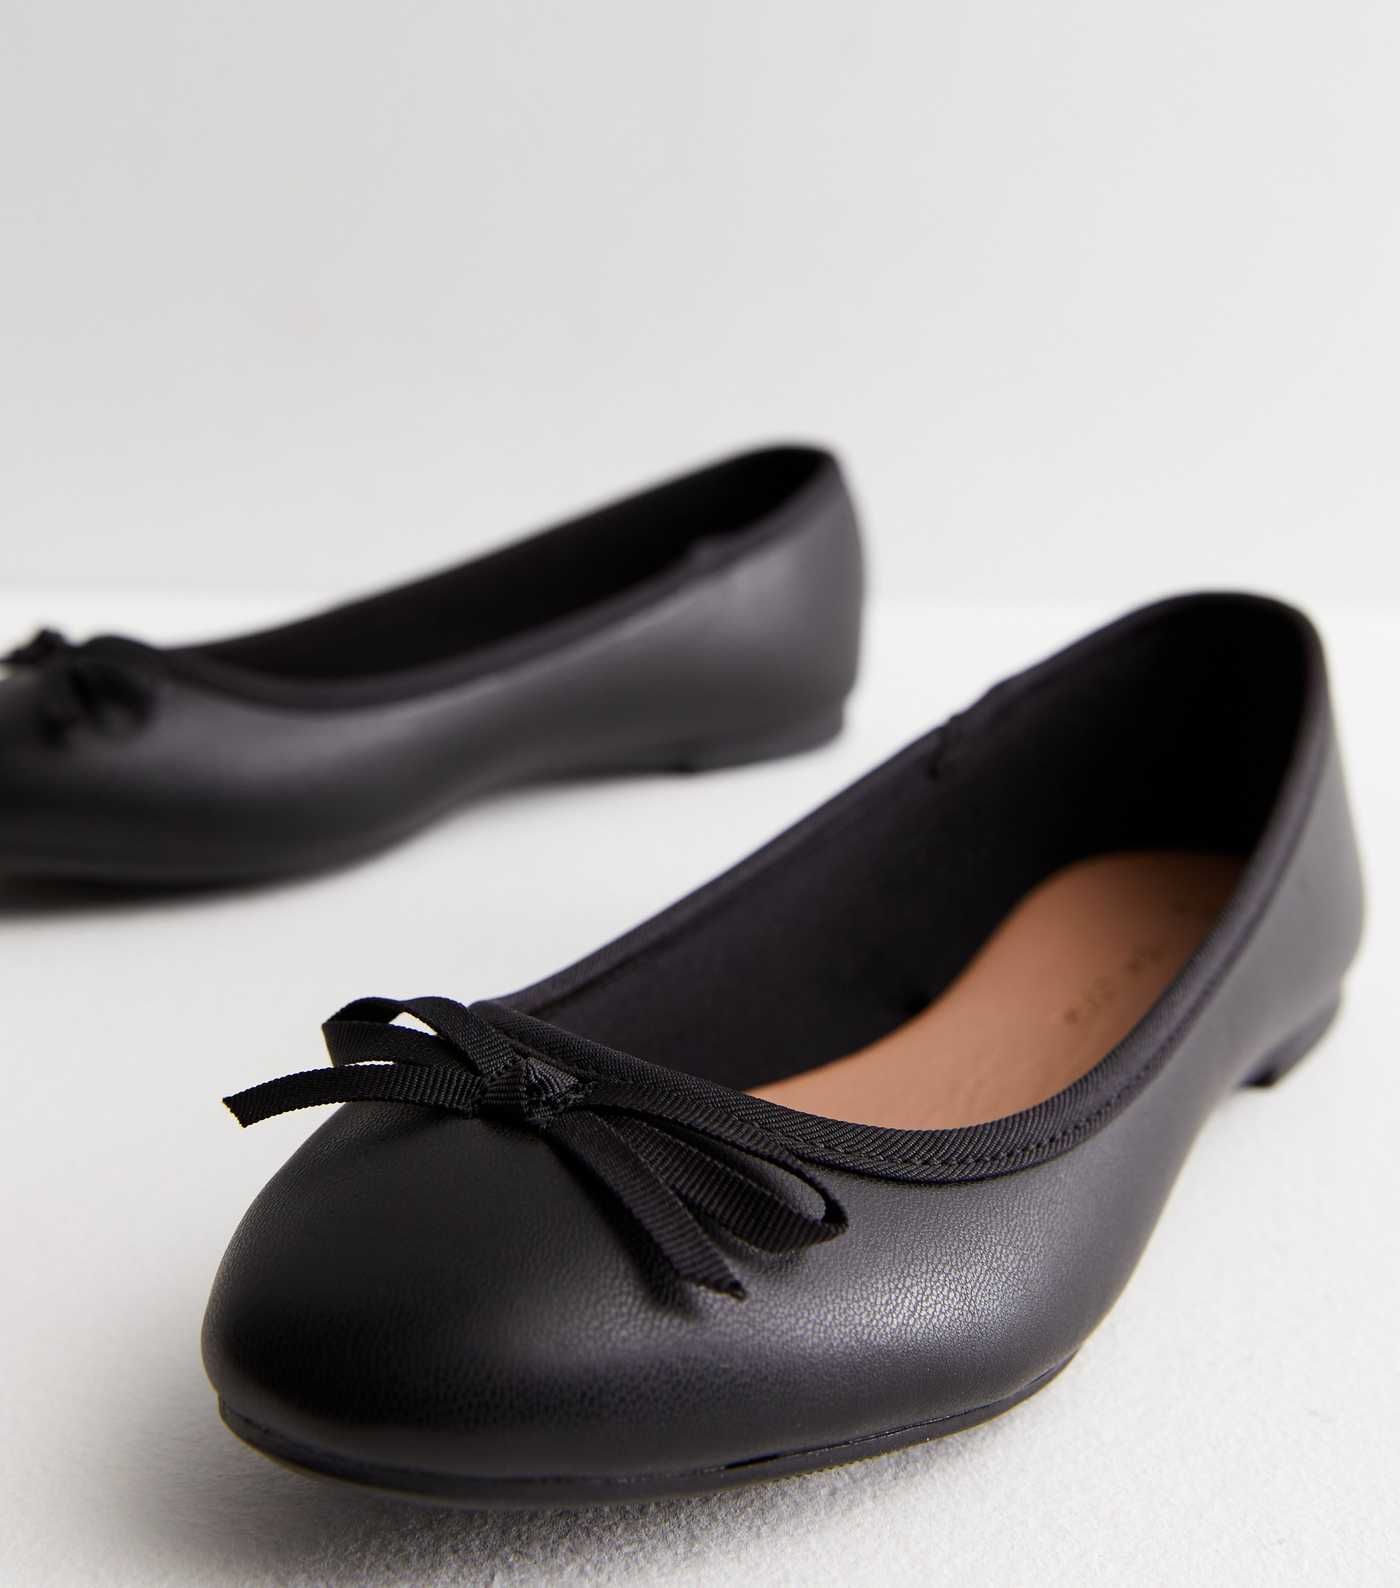 Black Ballerina Pumps
						
						Add to Saved Items
						Remove from Saved Items | New Look (UK)